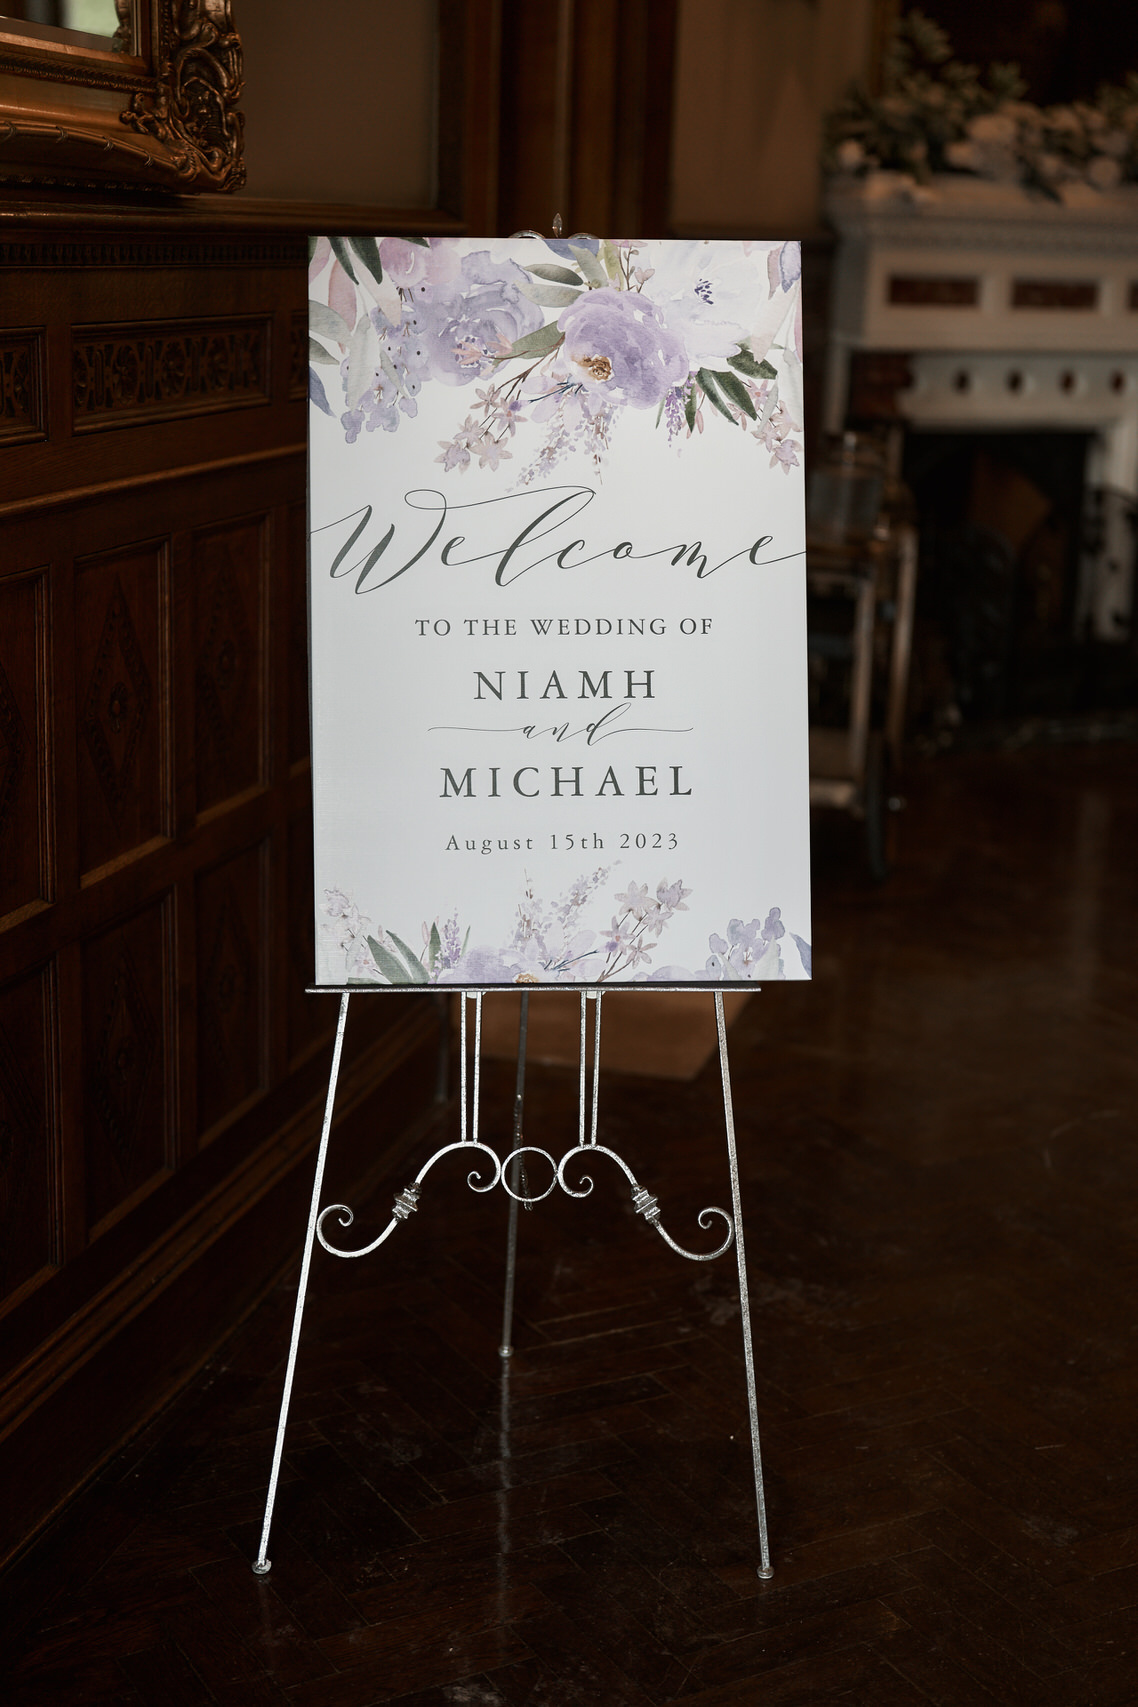 A welcome sign decorated with lavender flowers is placed on an easel.